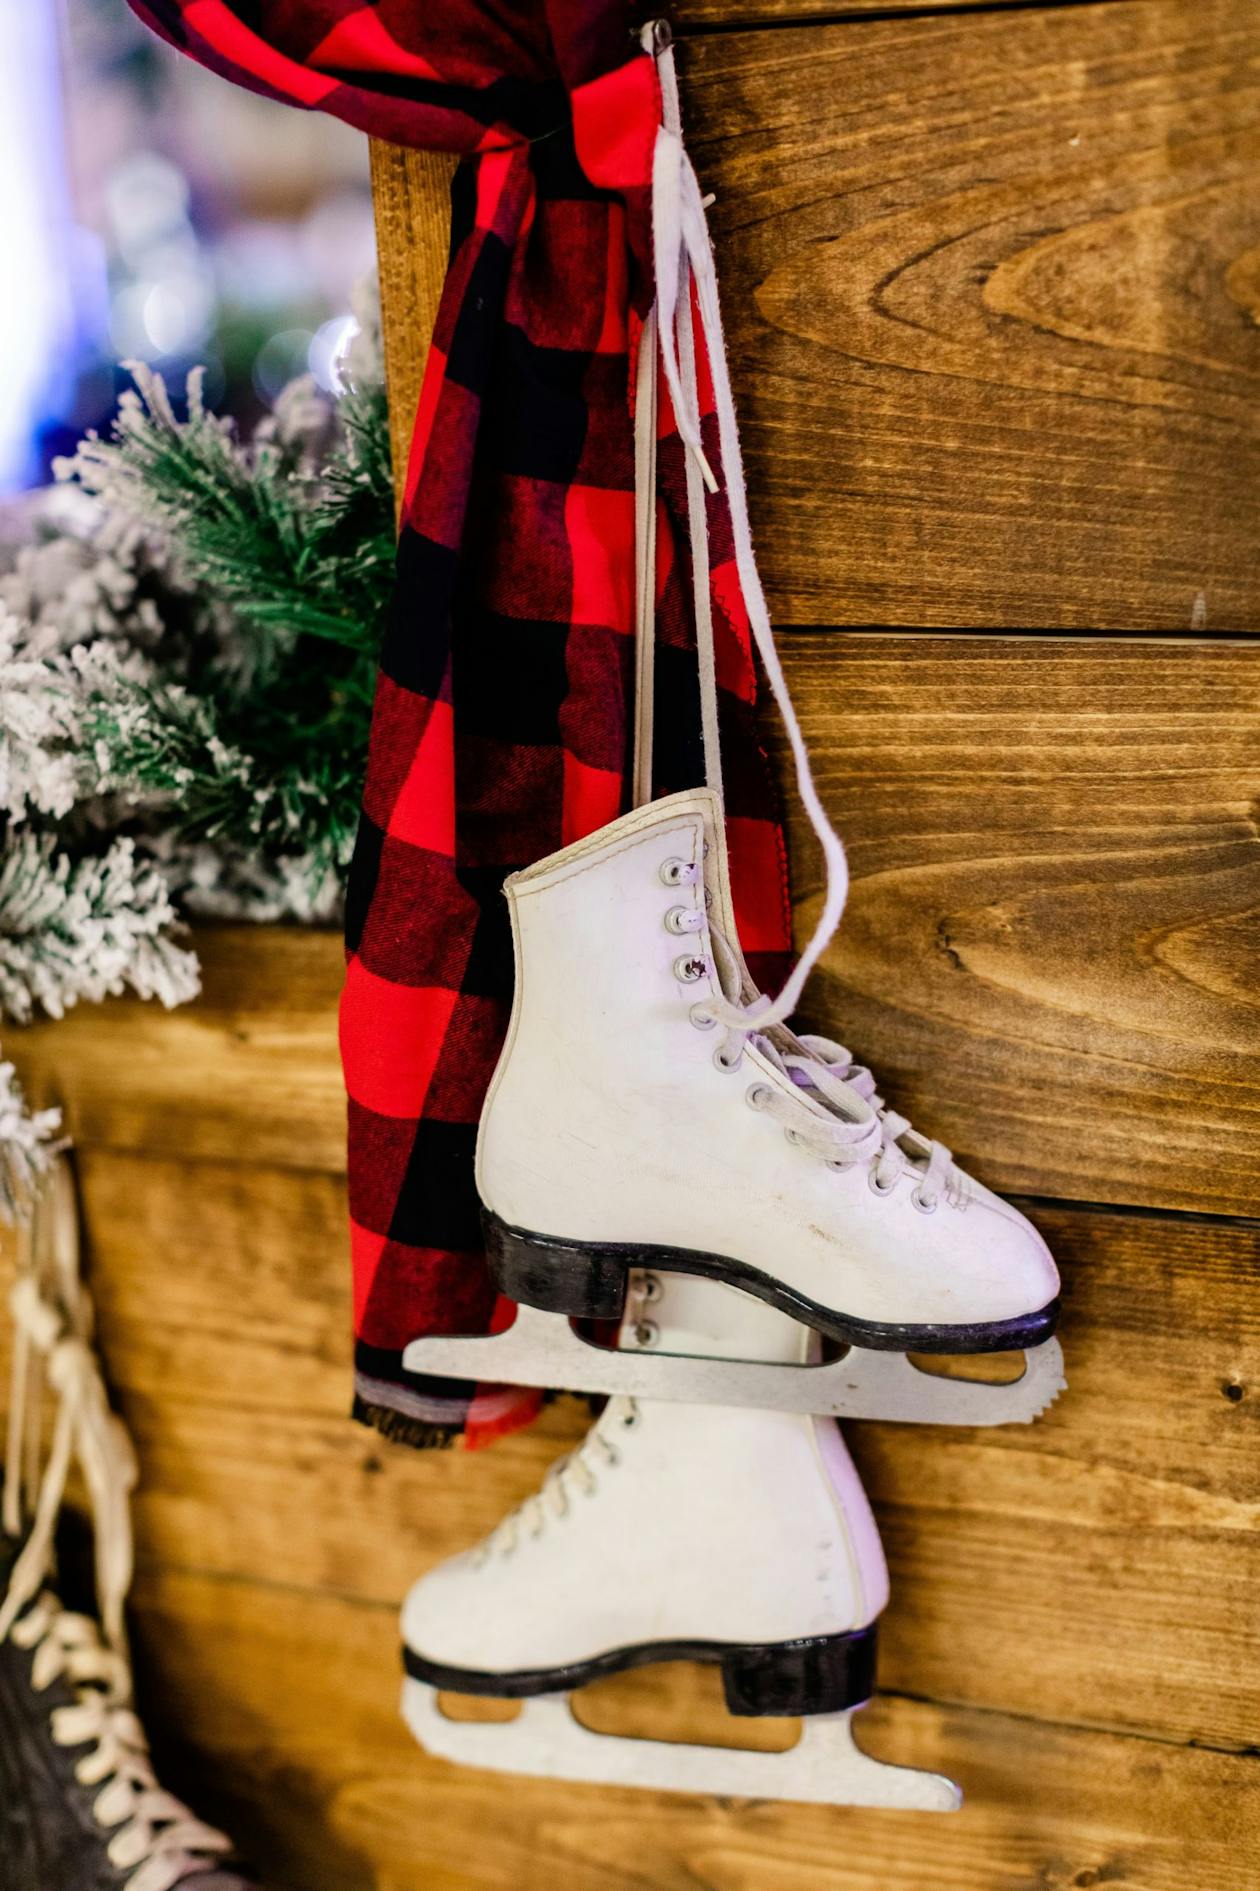 A wall with ice skates hung up on it and a cabin home design | PartySlate